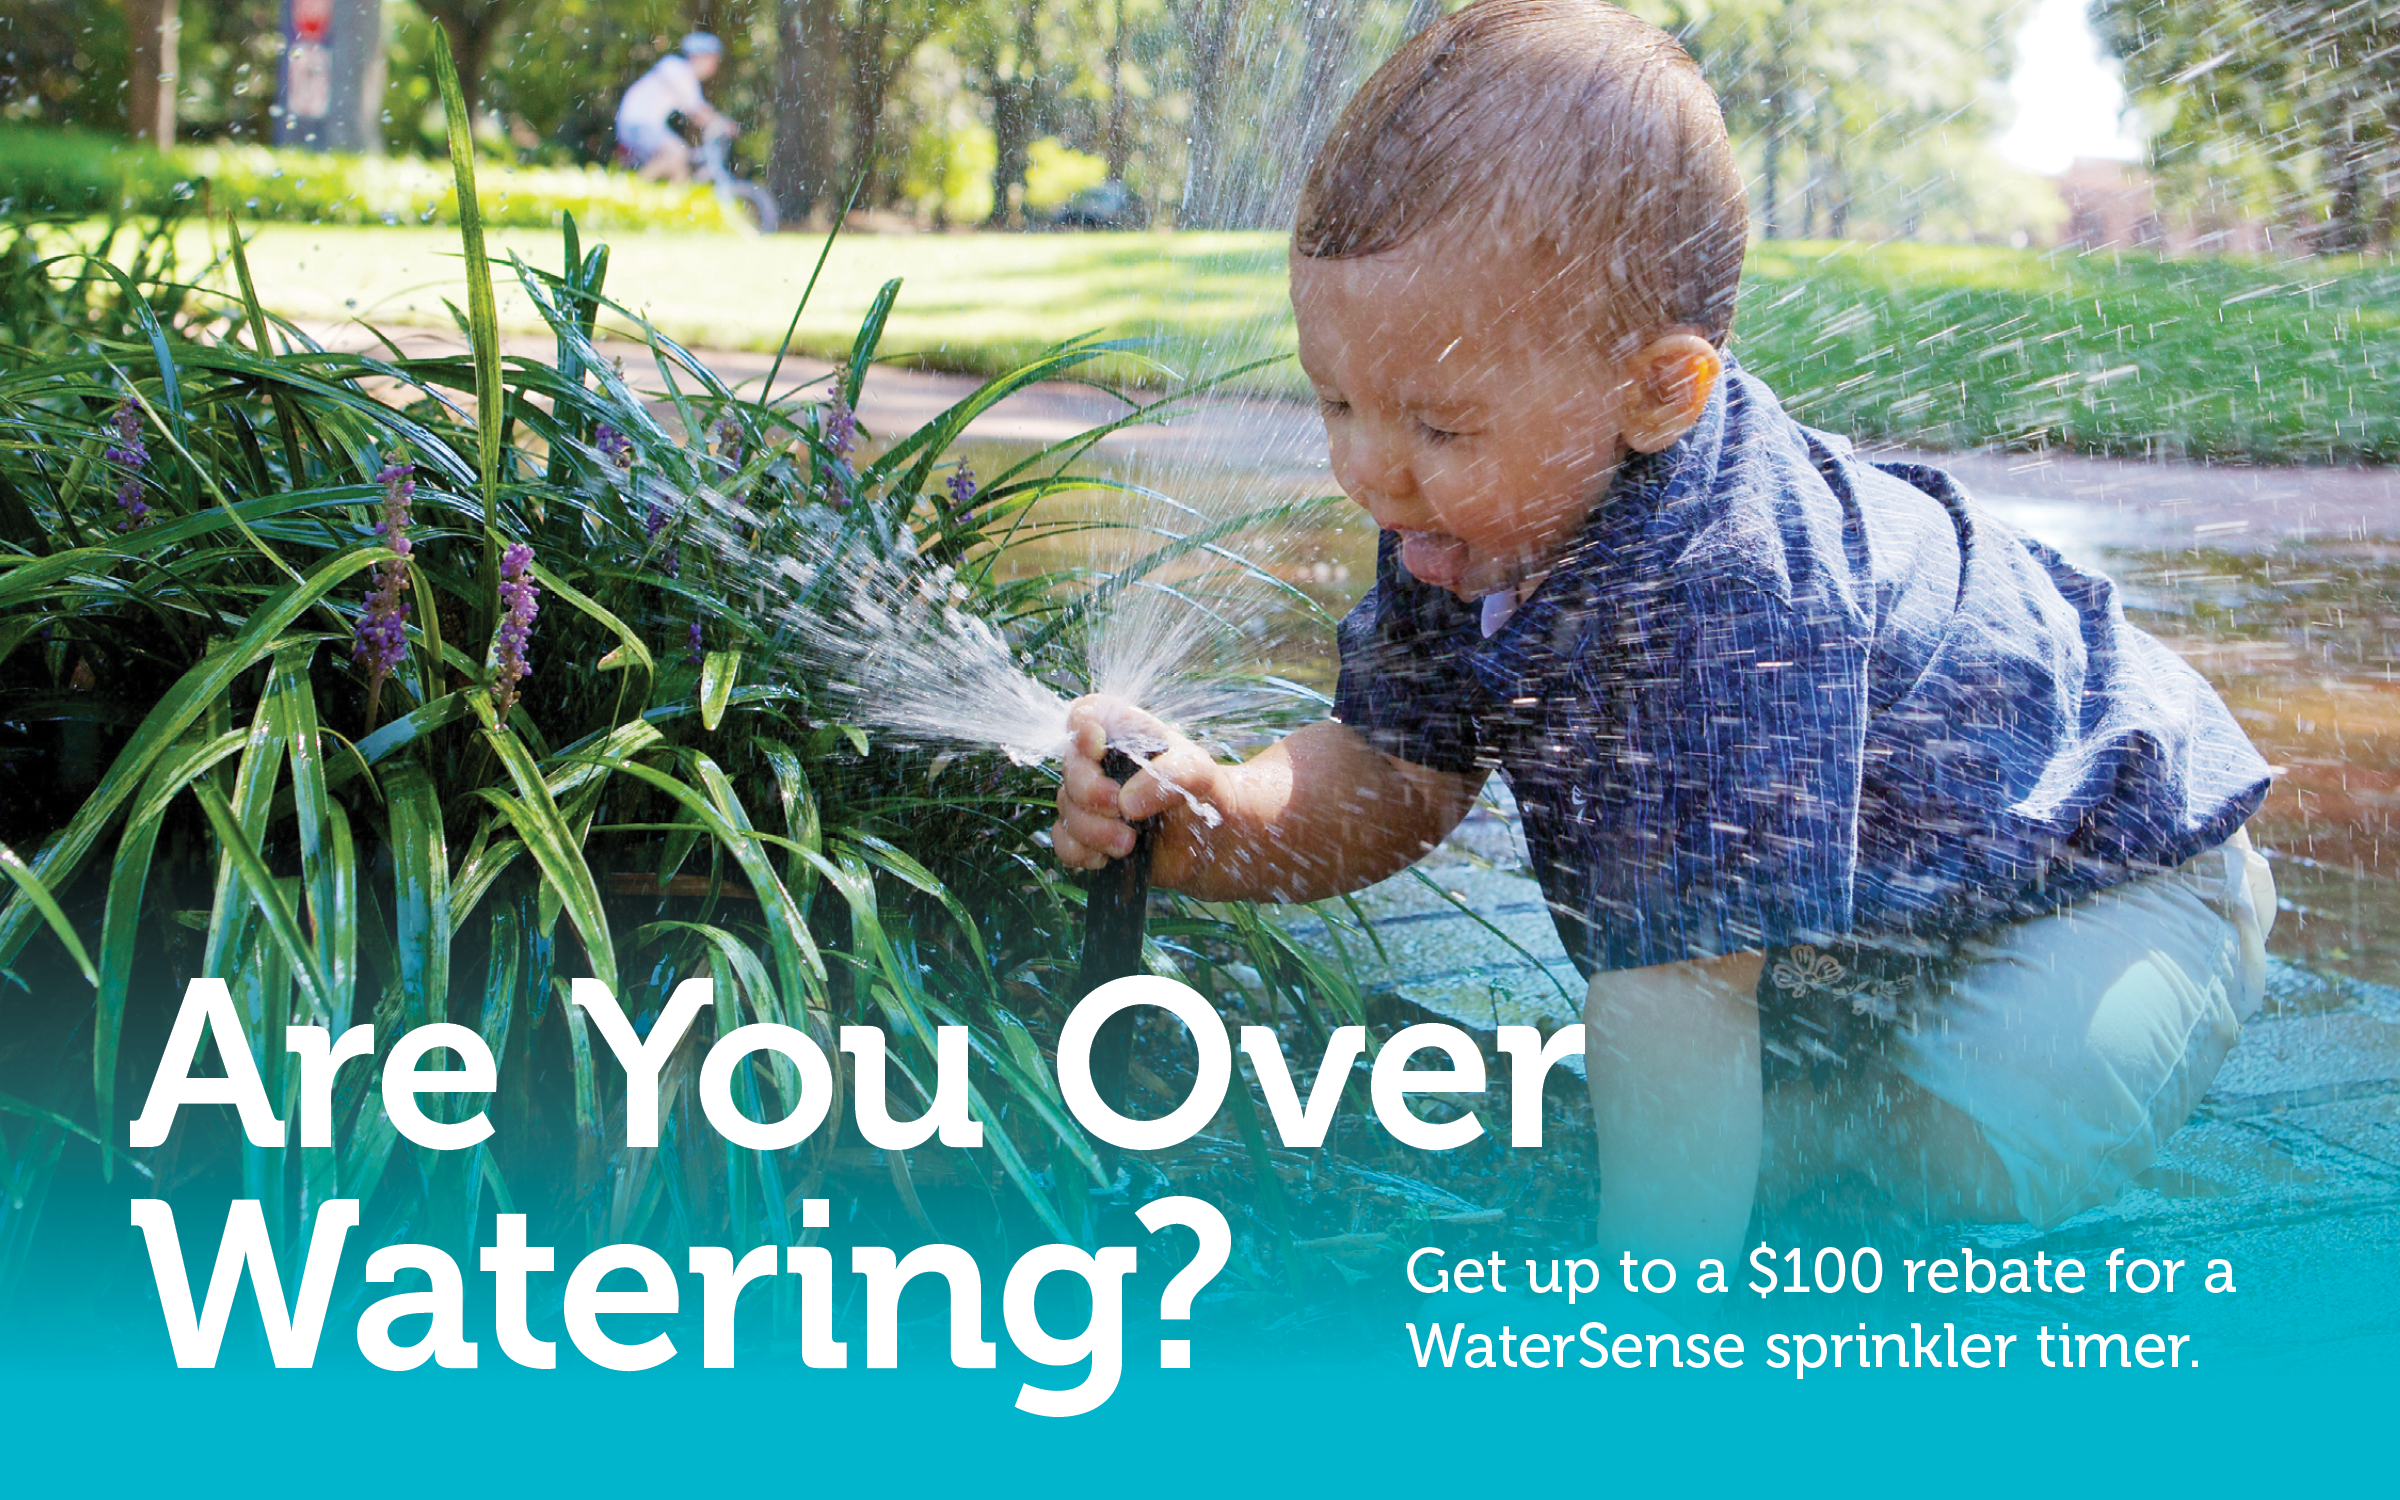 Direct Mail postcard design cover, Baby playing with a sprinkler--Are you over watering?